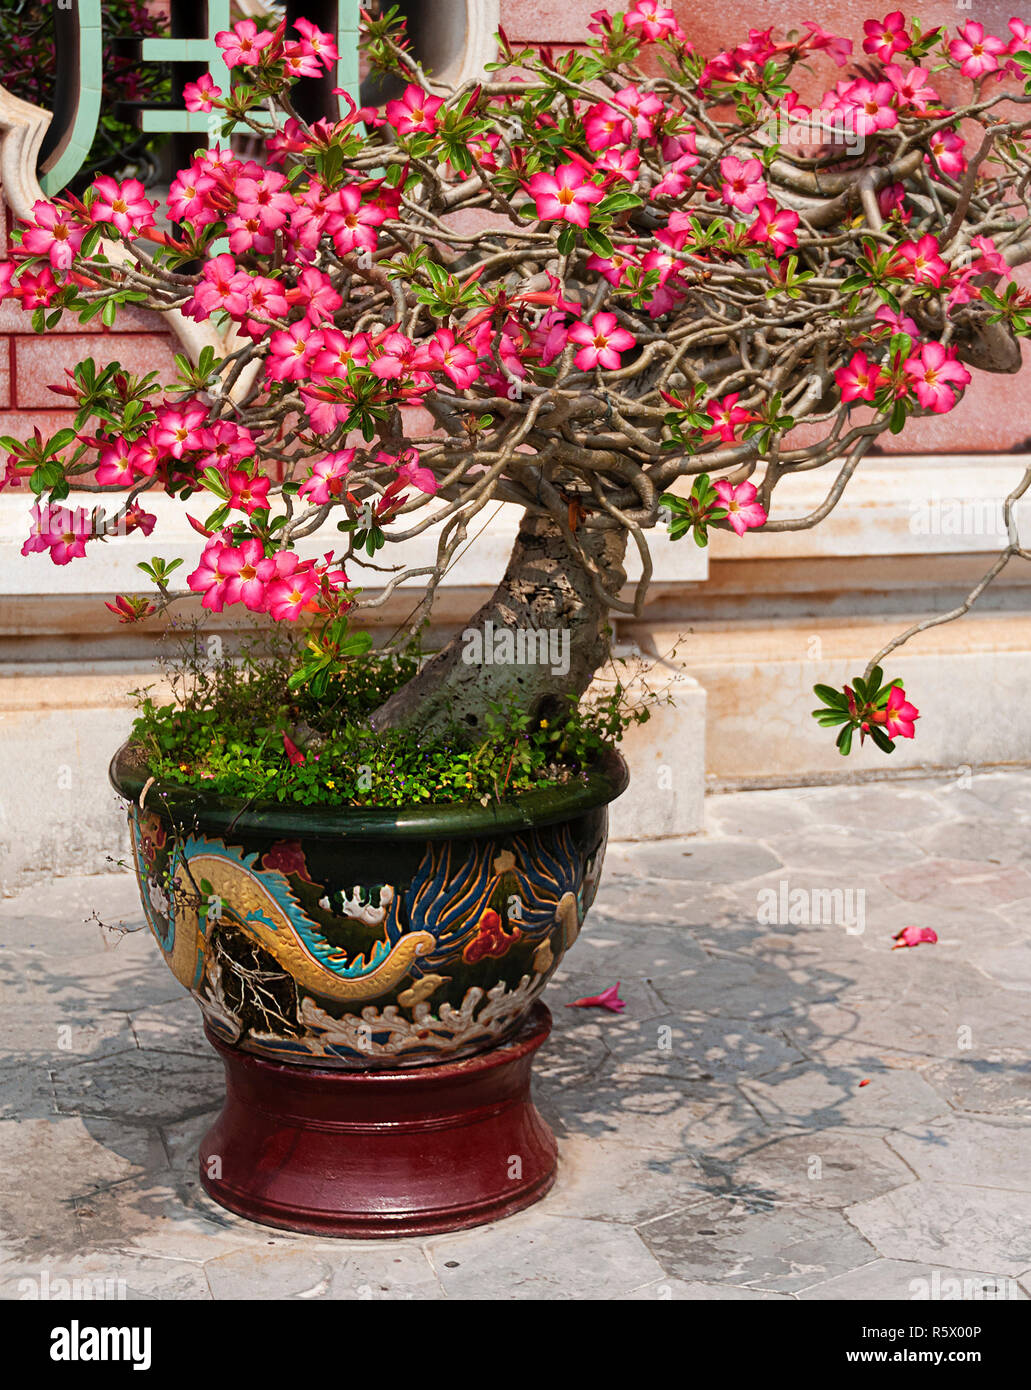 Flowering bonsai tree in traditional chinese style pot growing outdoors - Hoi An, Vietnam Stock Photo